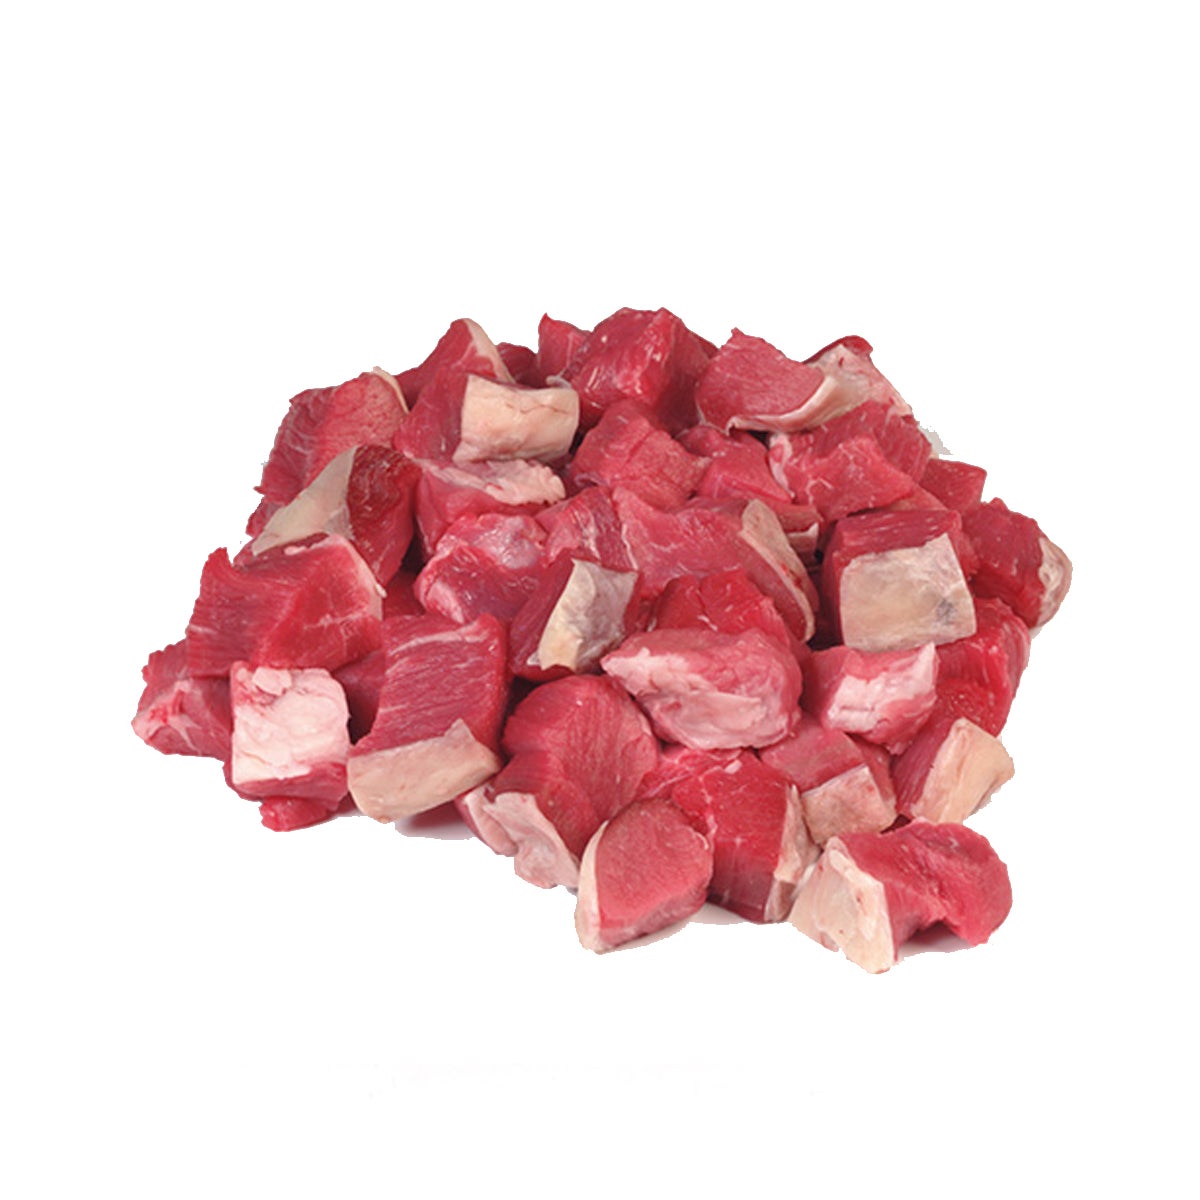 FLANK CUBES BEEF (PACK OF 1 LB)